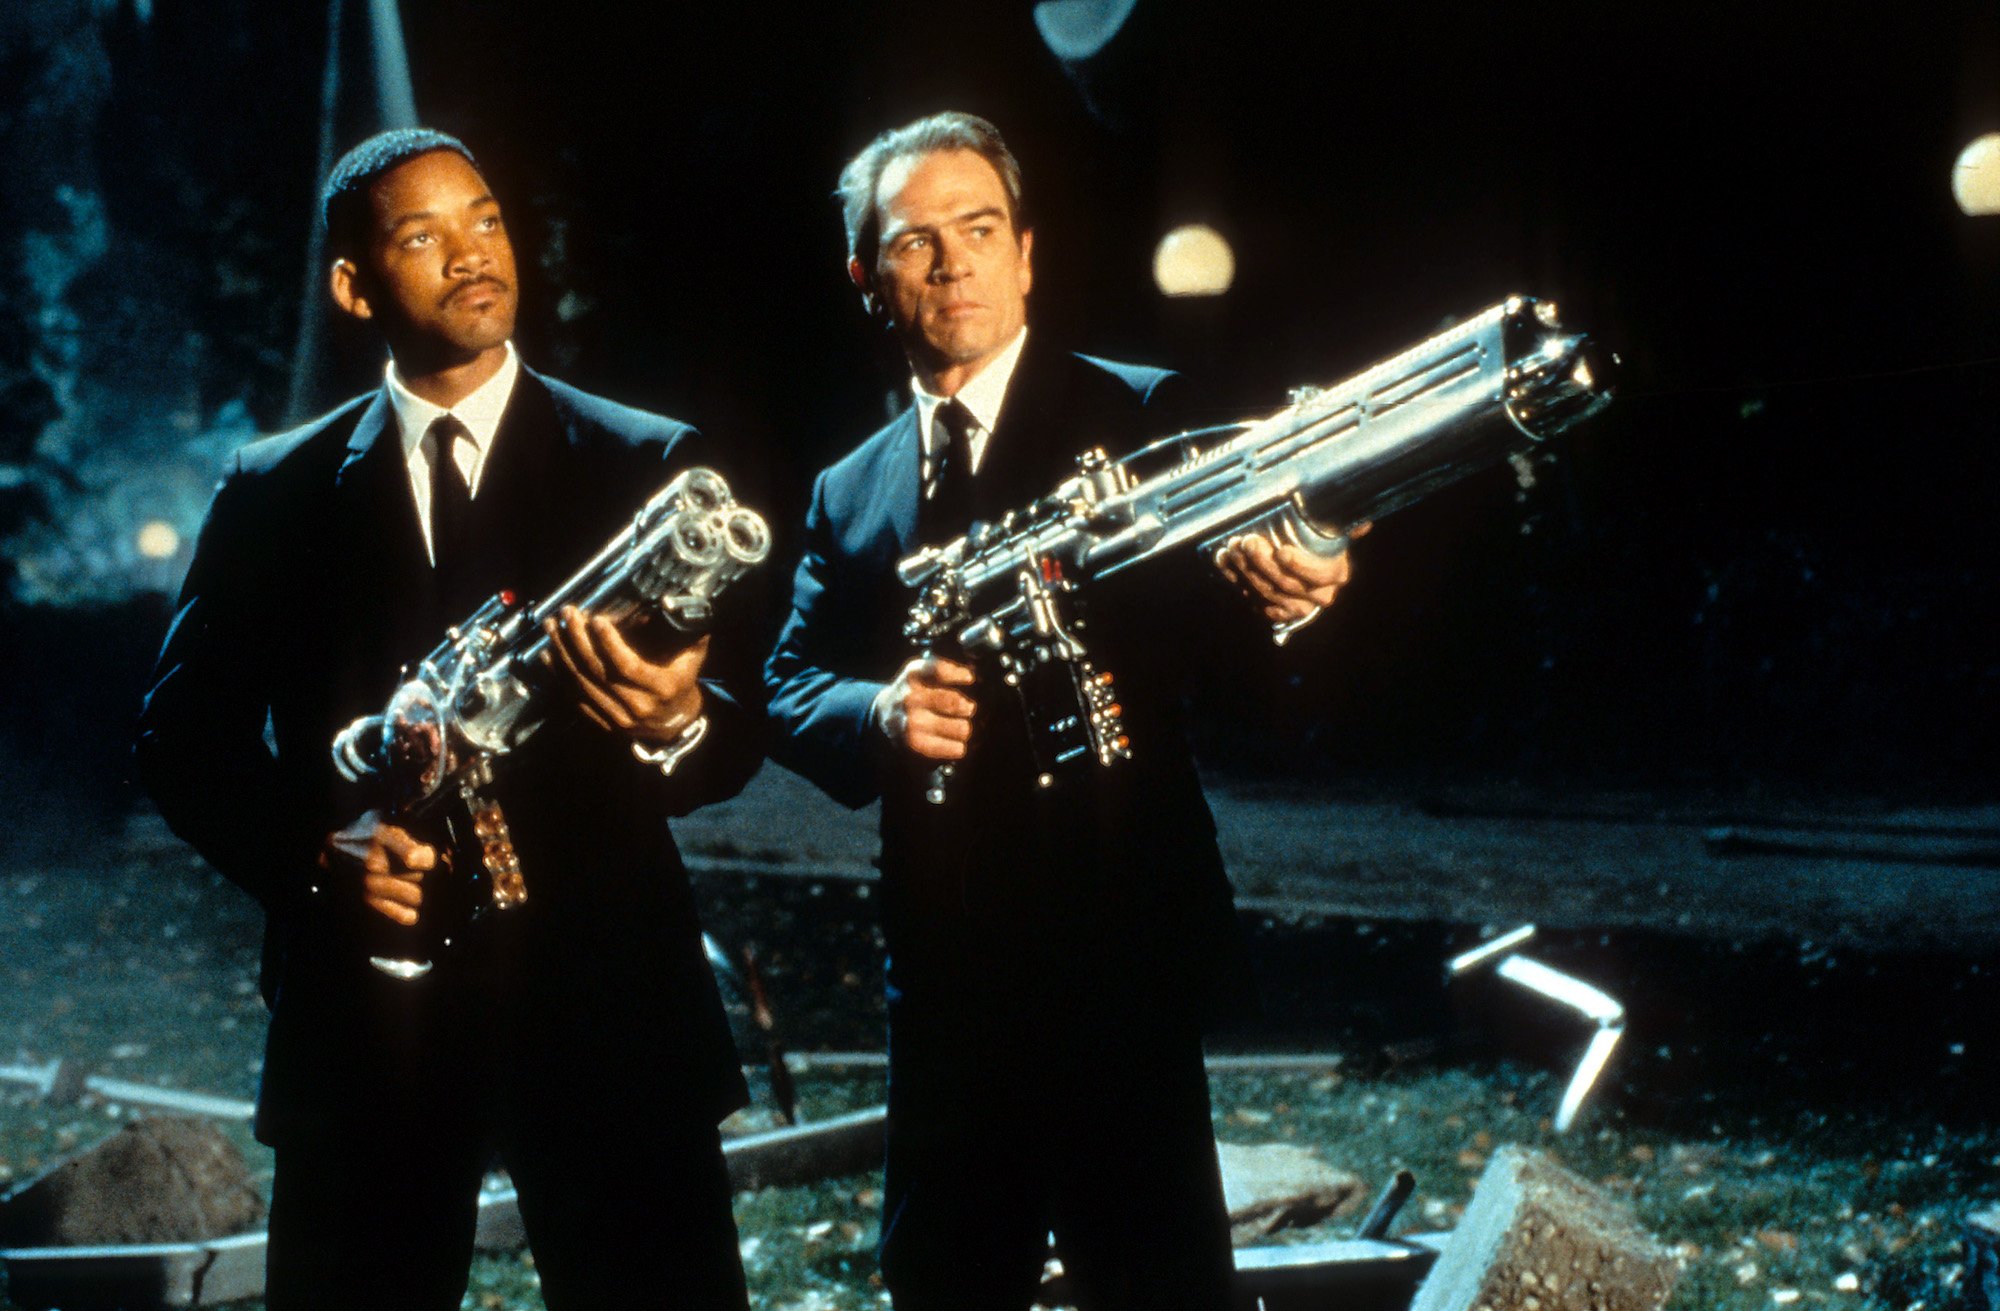 Will Smith box office hit 'Men in Black' with Smith and Tommy Lee Jones holding guns